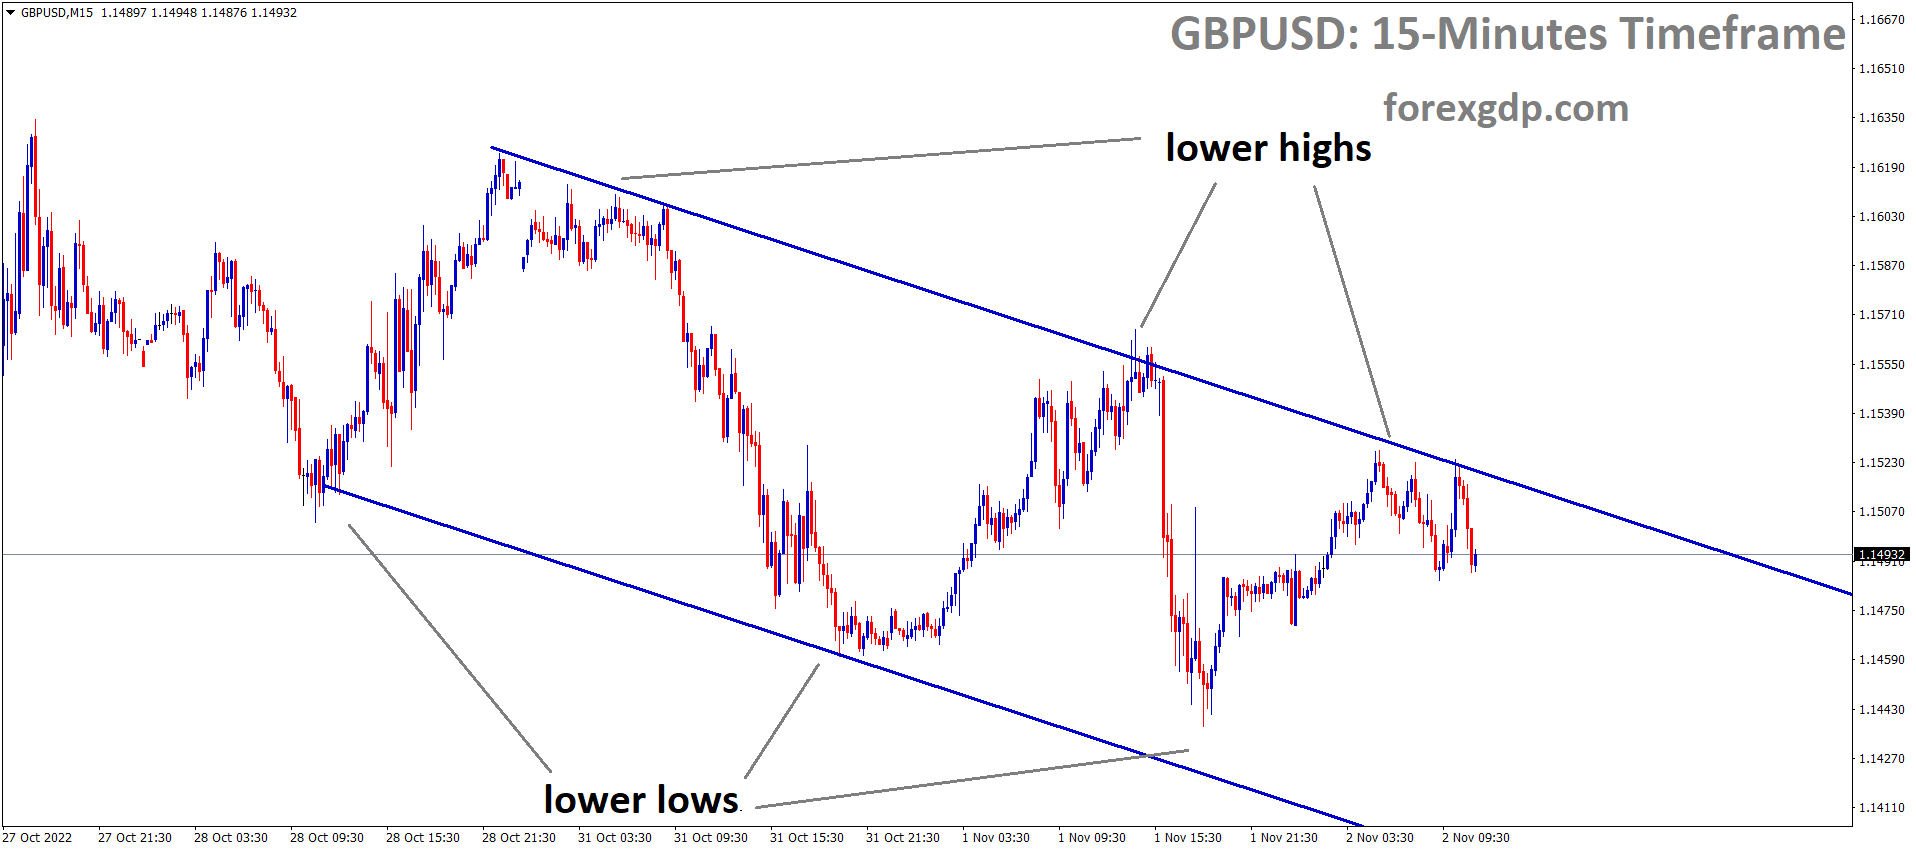 GBPUSD is moving in the Descending channel and the market has fallen from the lower high area of the channel1